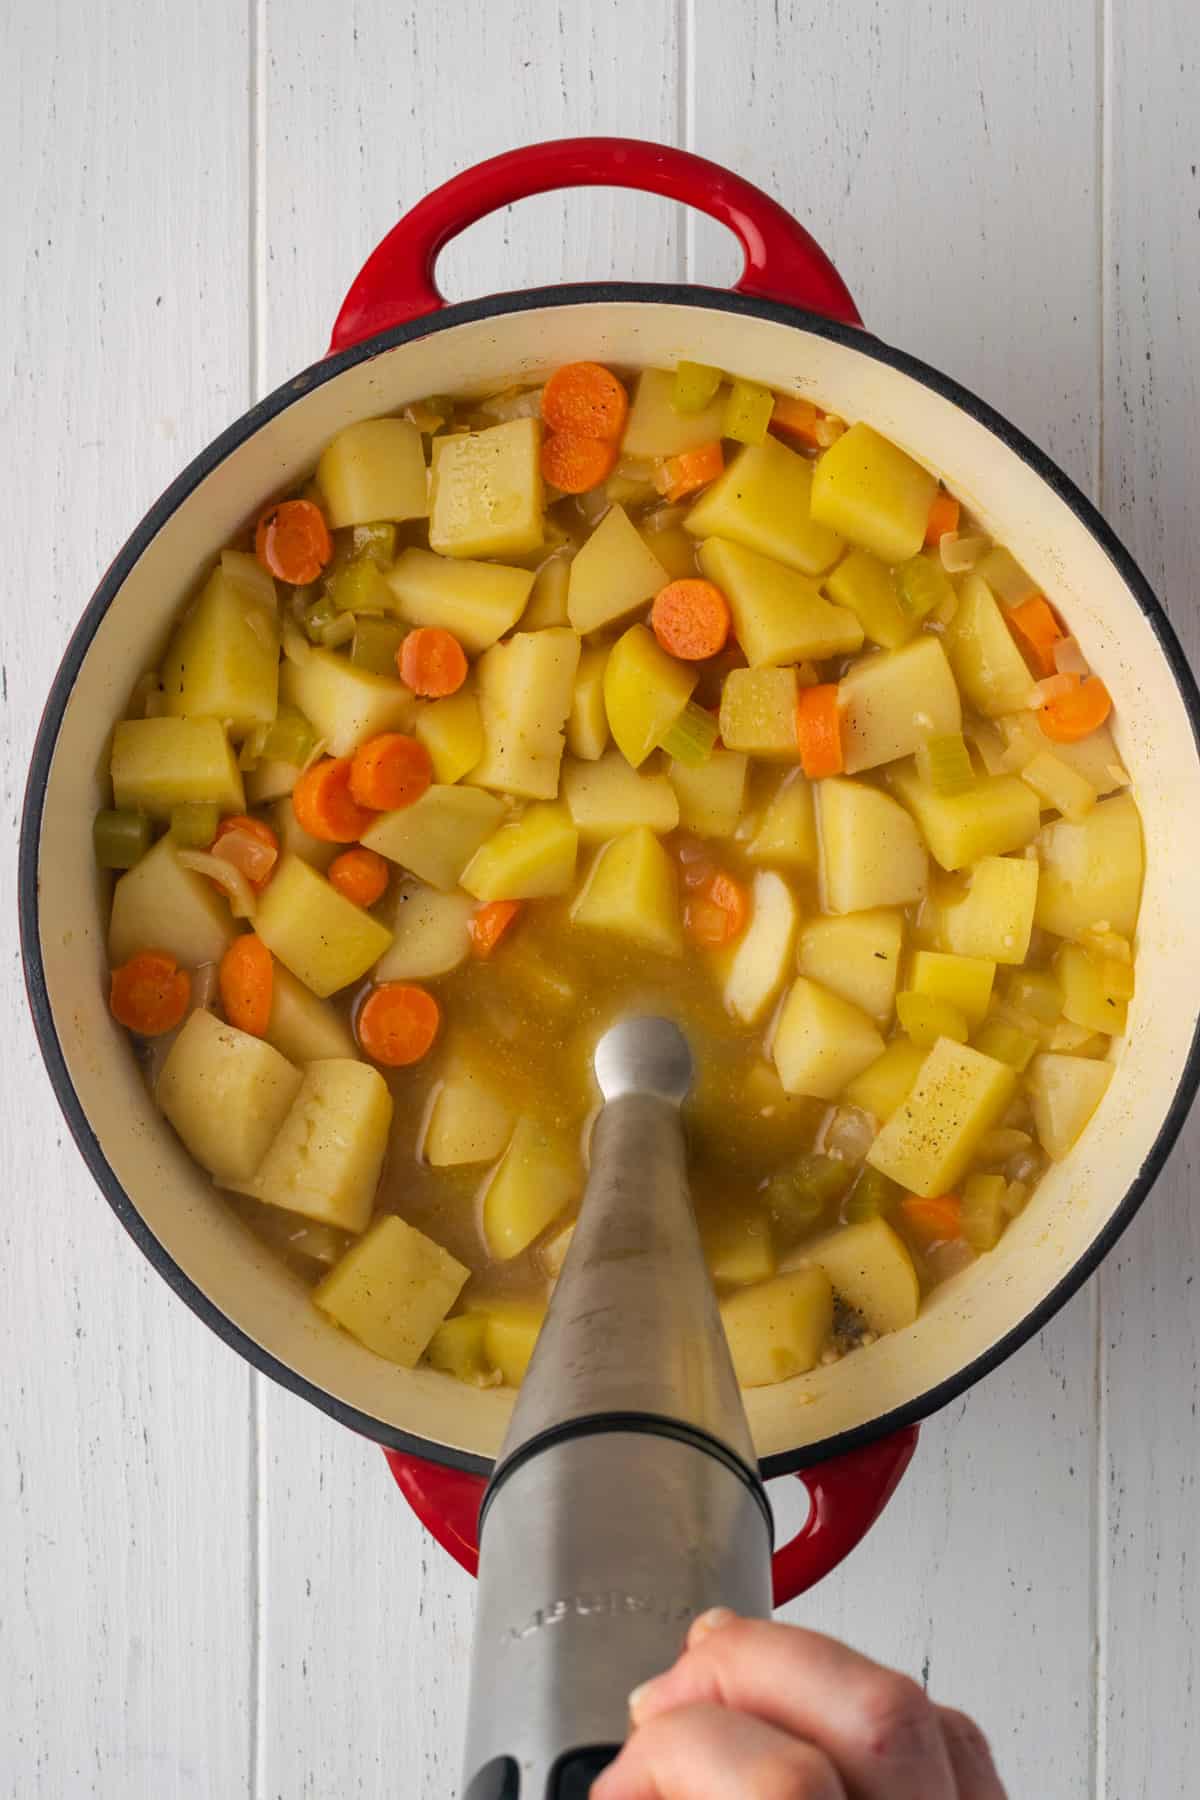 An immersion blender partially submerged in a pot of cooked potatoes and carrots.